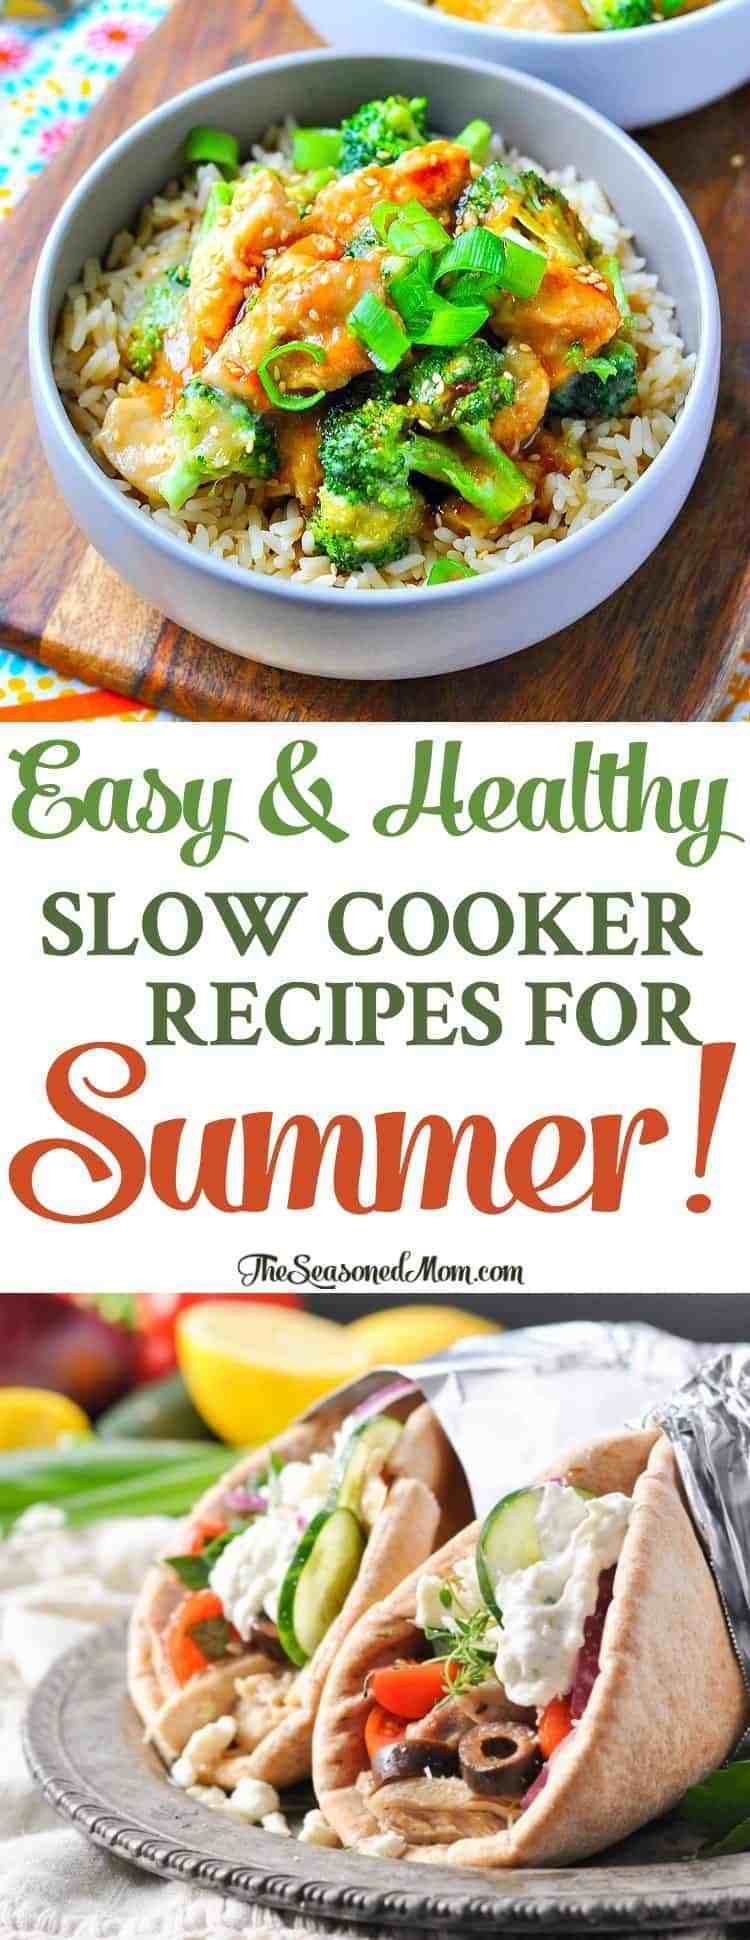 Healthy Slow Cooker Recipes For Two
 Easy Healthy Slow Cooker Recipes for Summer The